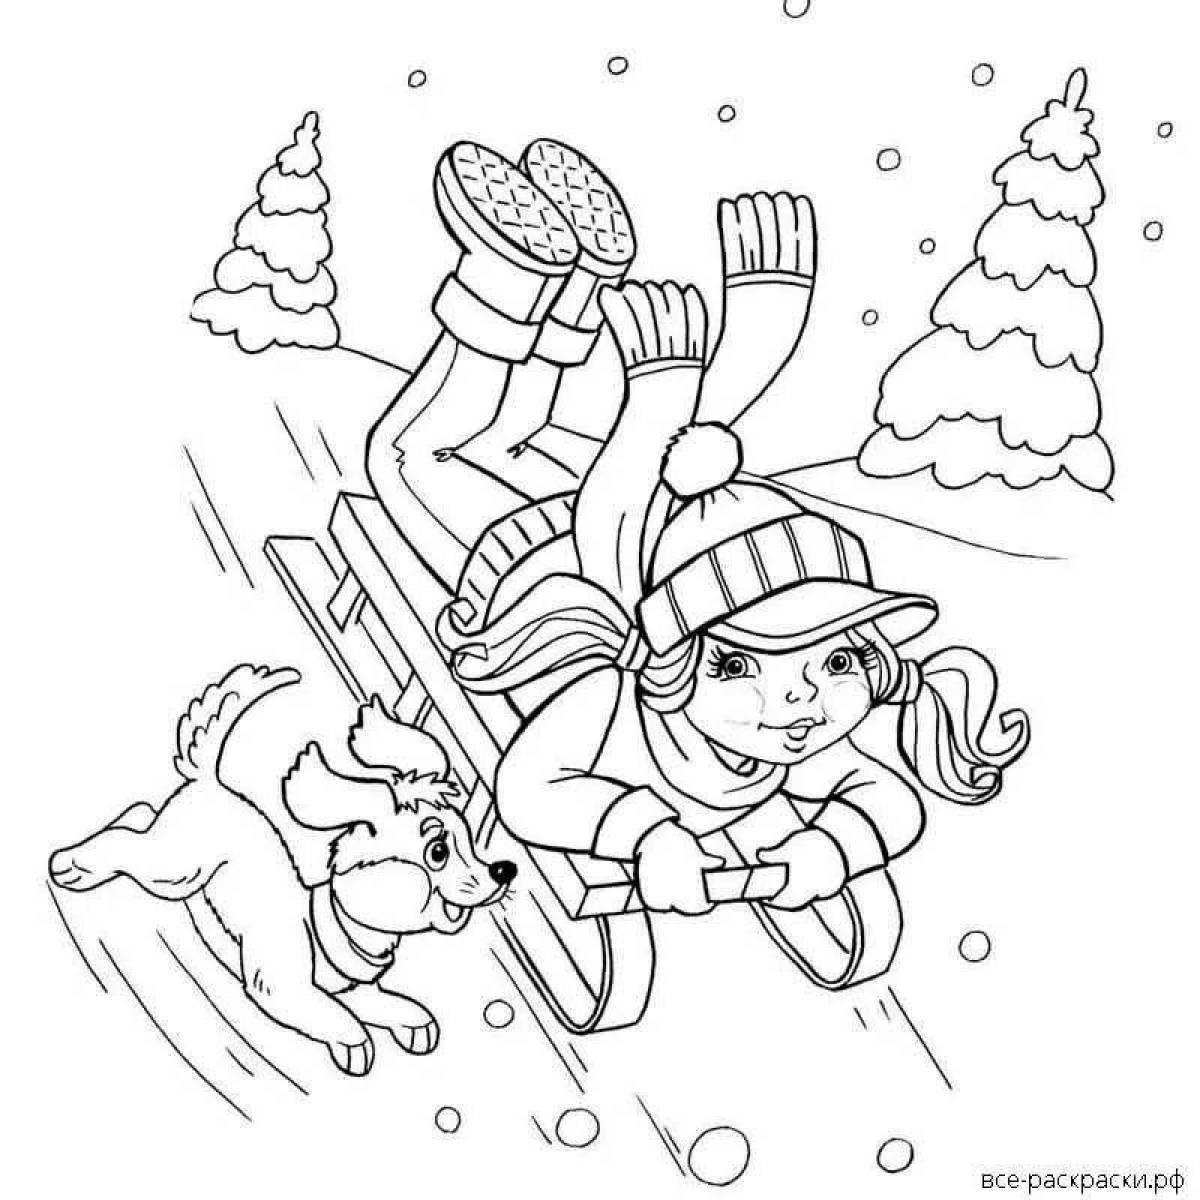 Playful winter coloring for children 3-4 years old